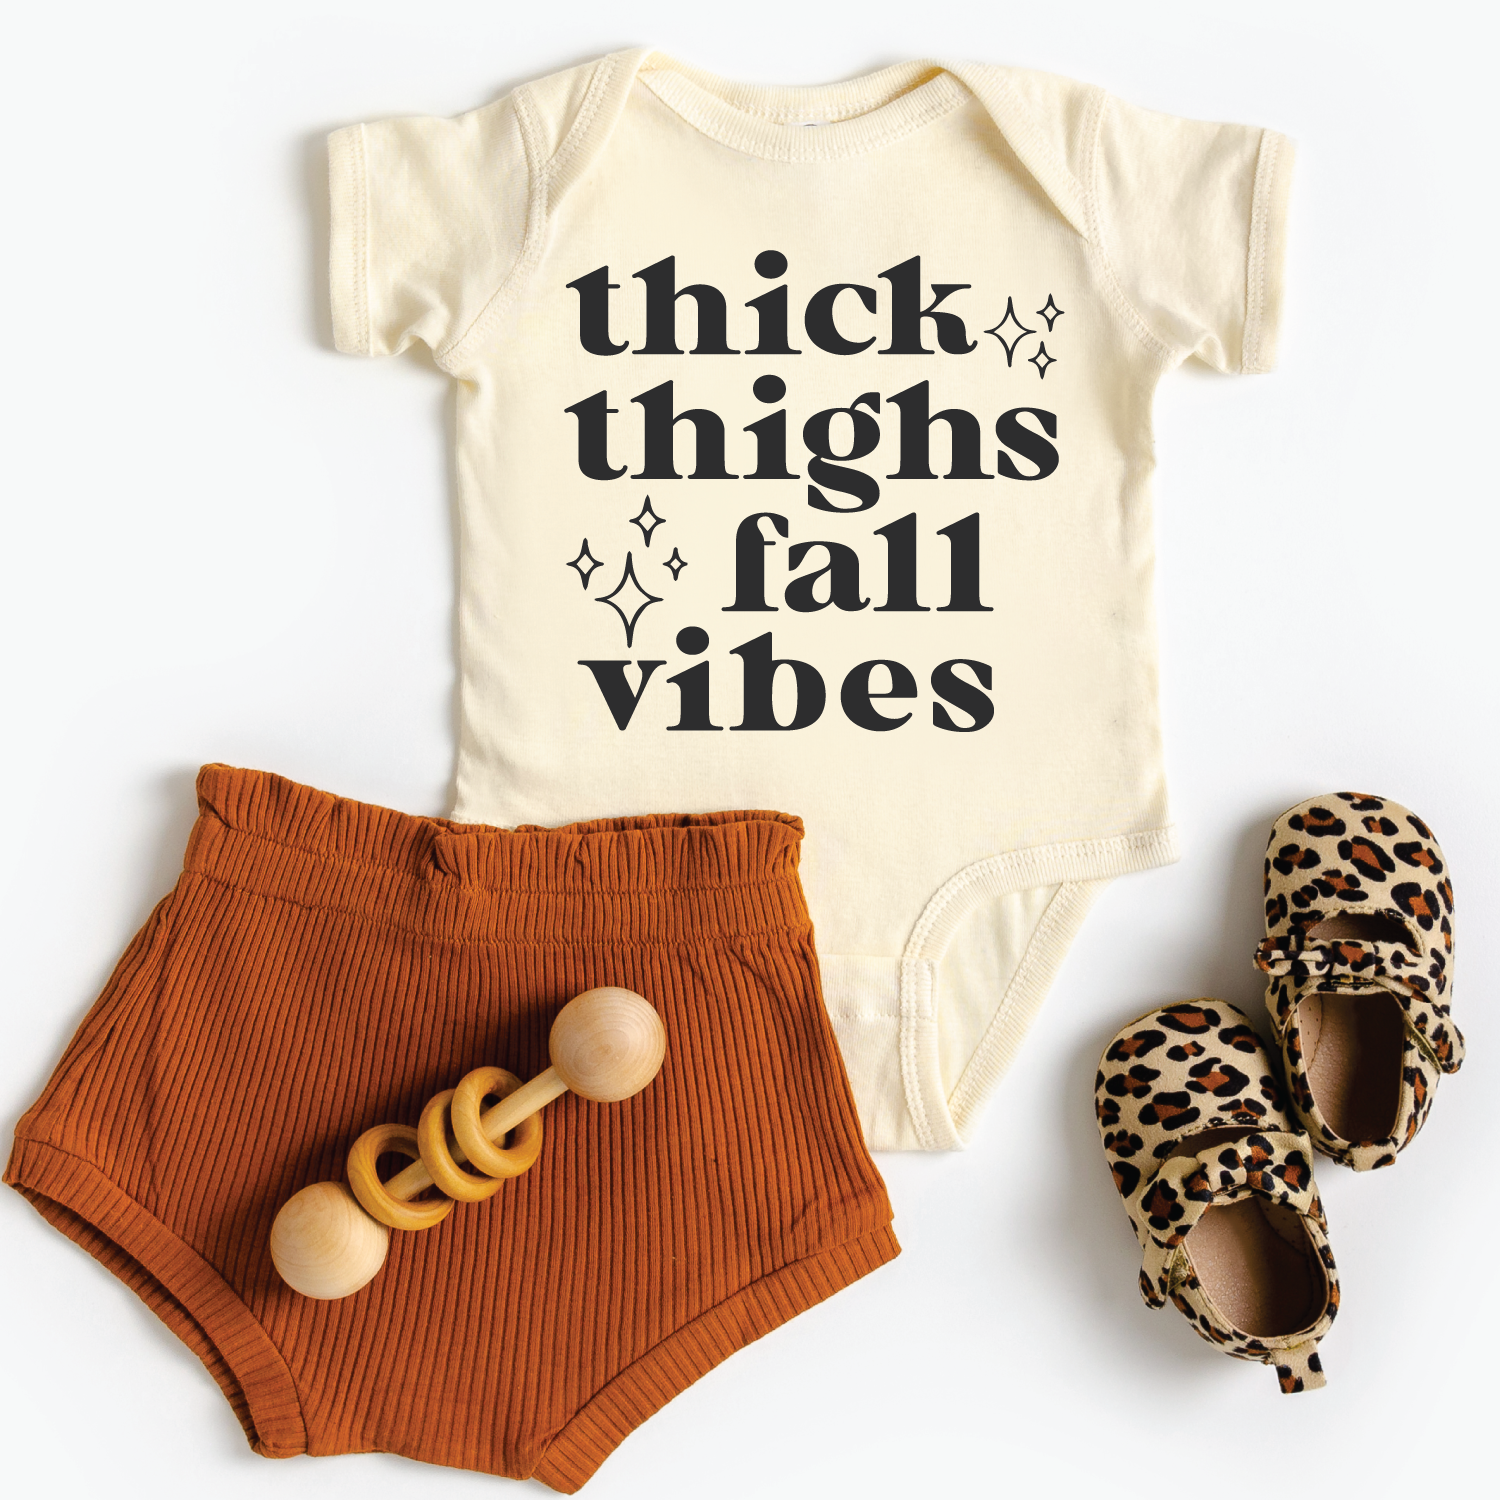 Fall Vibes baby onesie Eden and Eve Clothing Company